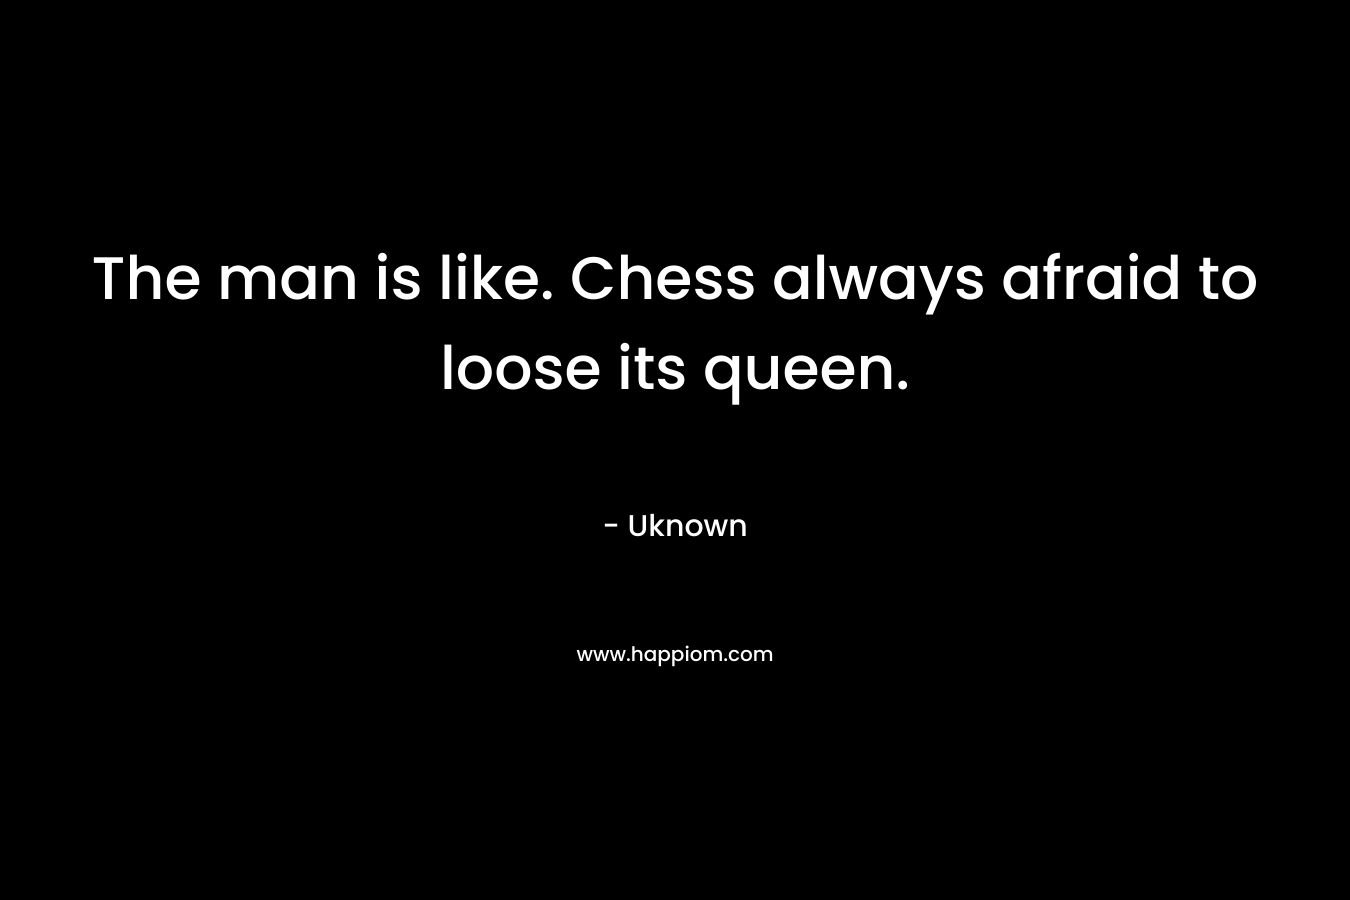 The man is like. Chess always afraid to loose its queen.